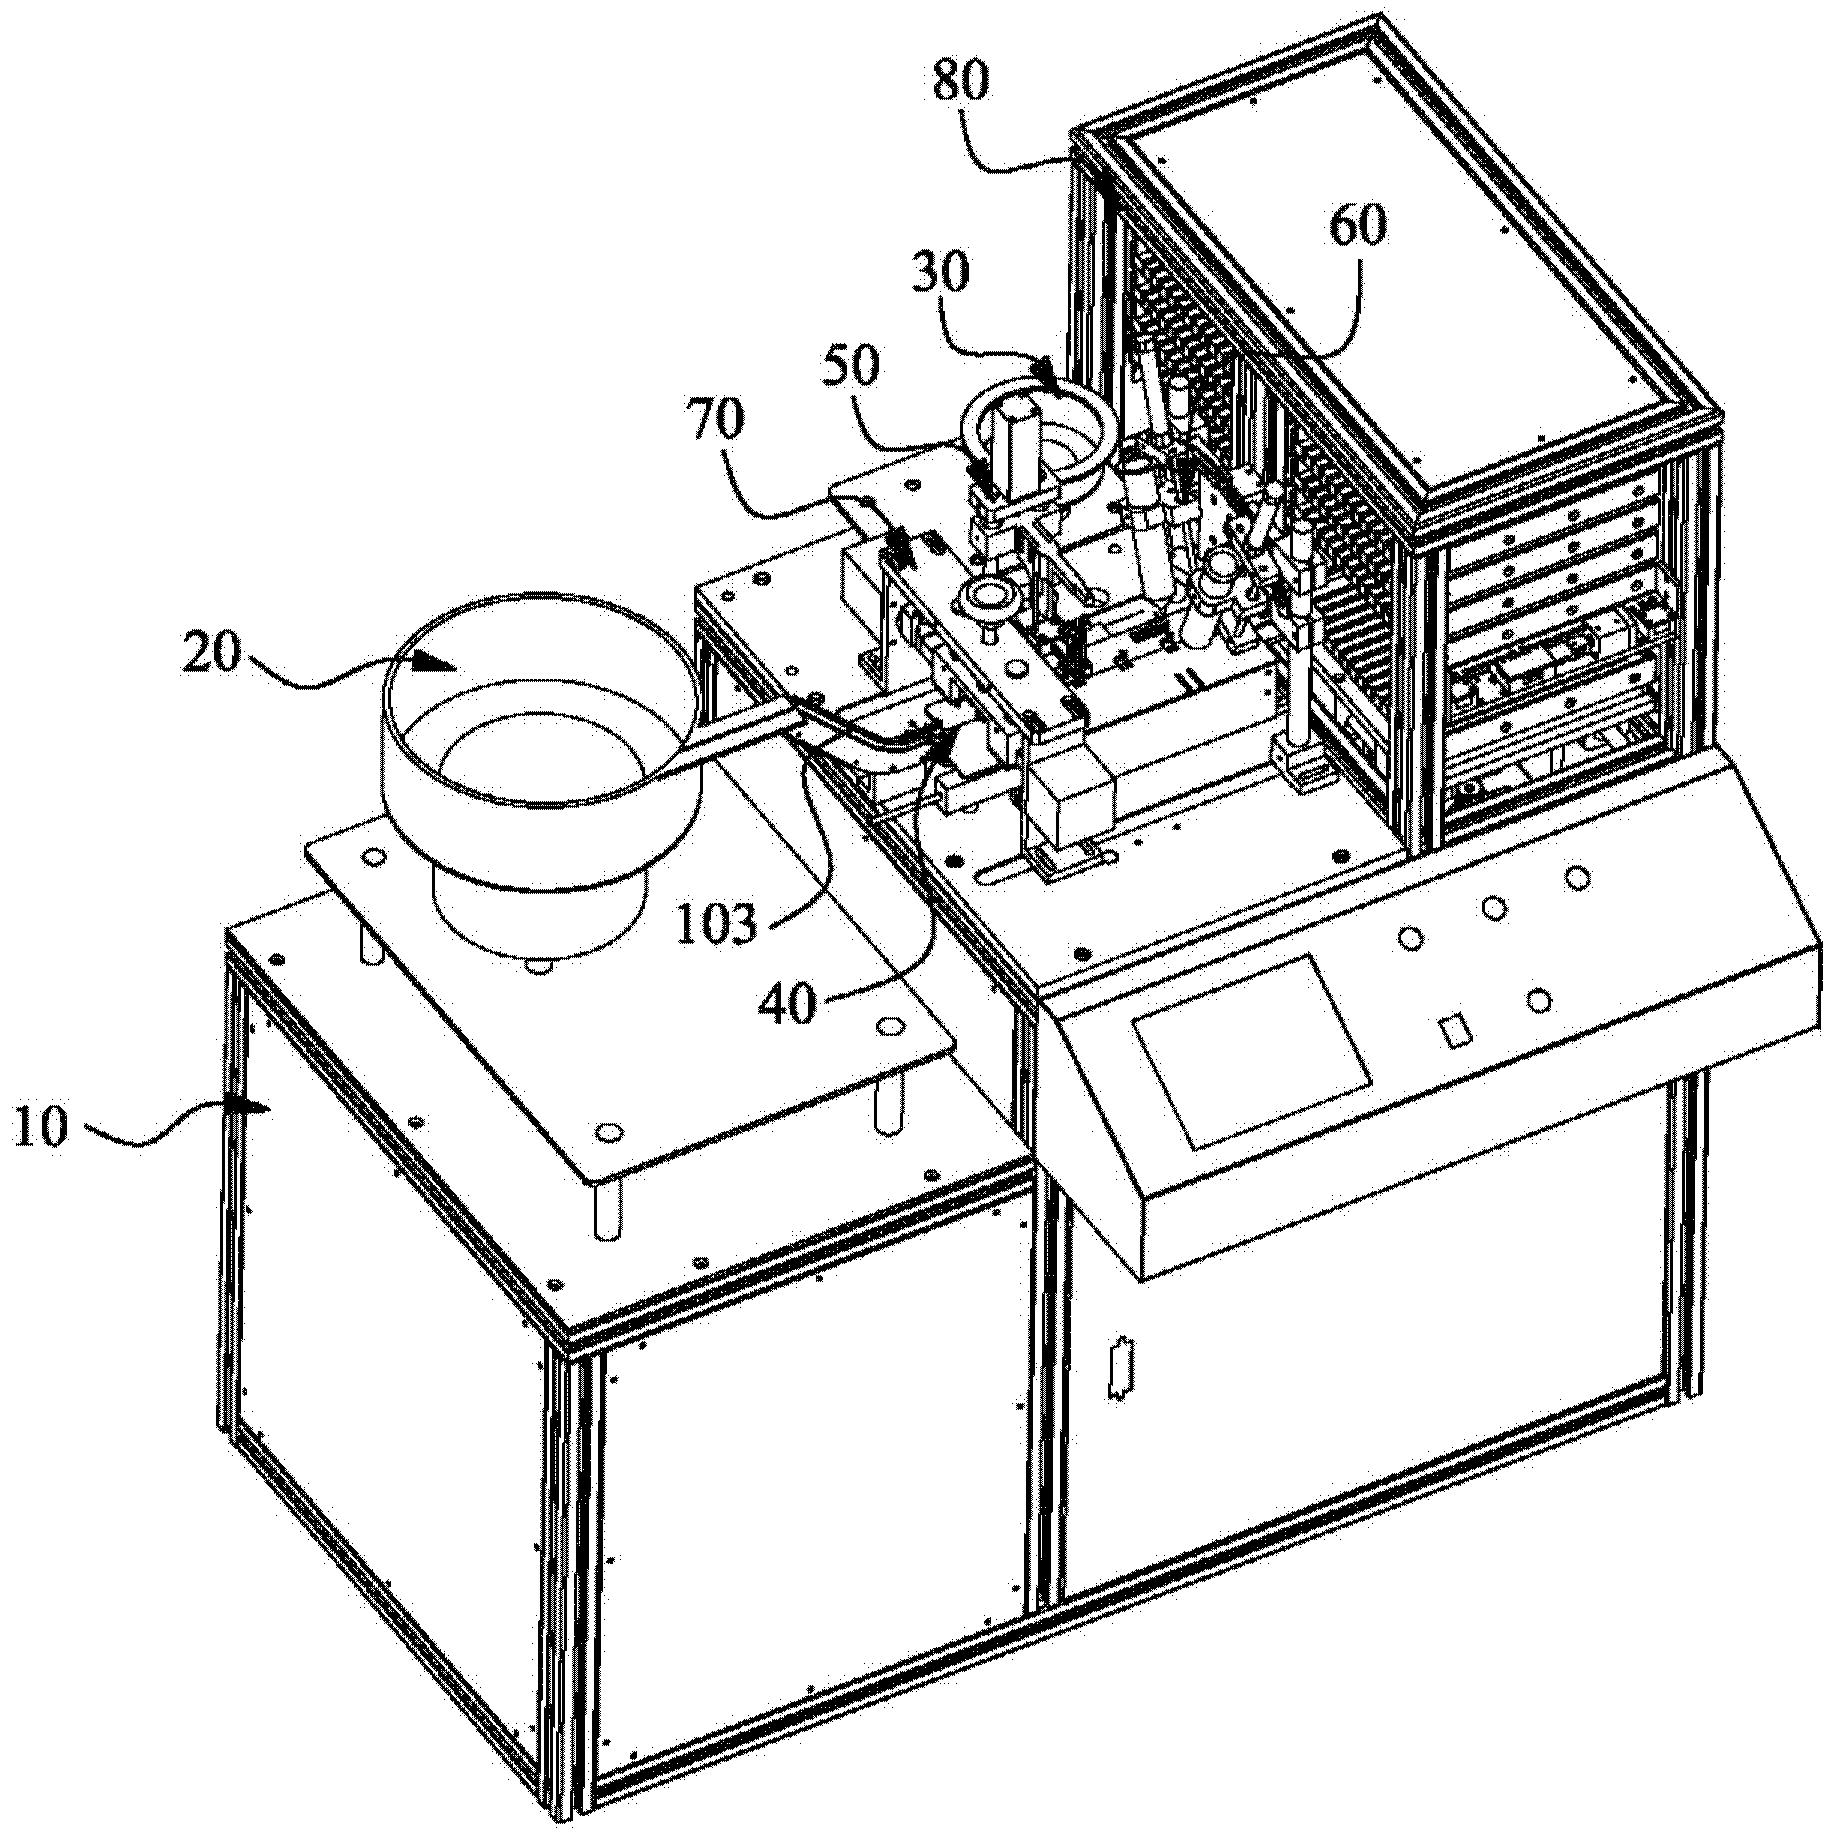 Assembling machine with transistor automatically sleeved with magnet ring